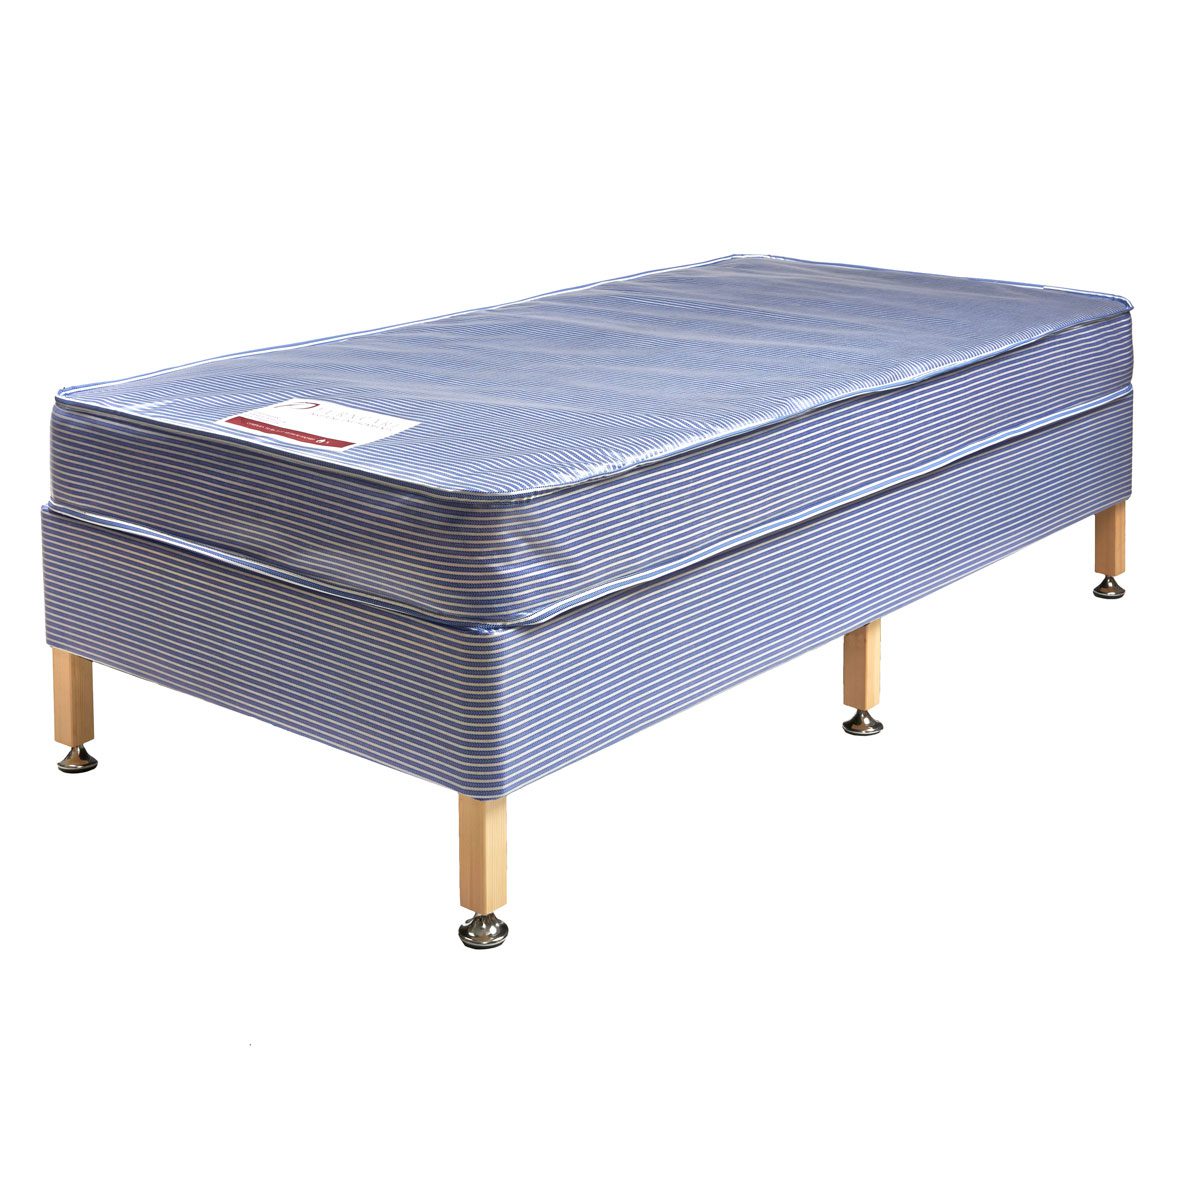 Single Verna care home Bed Base With PVC Cover